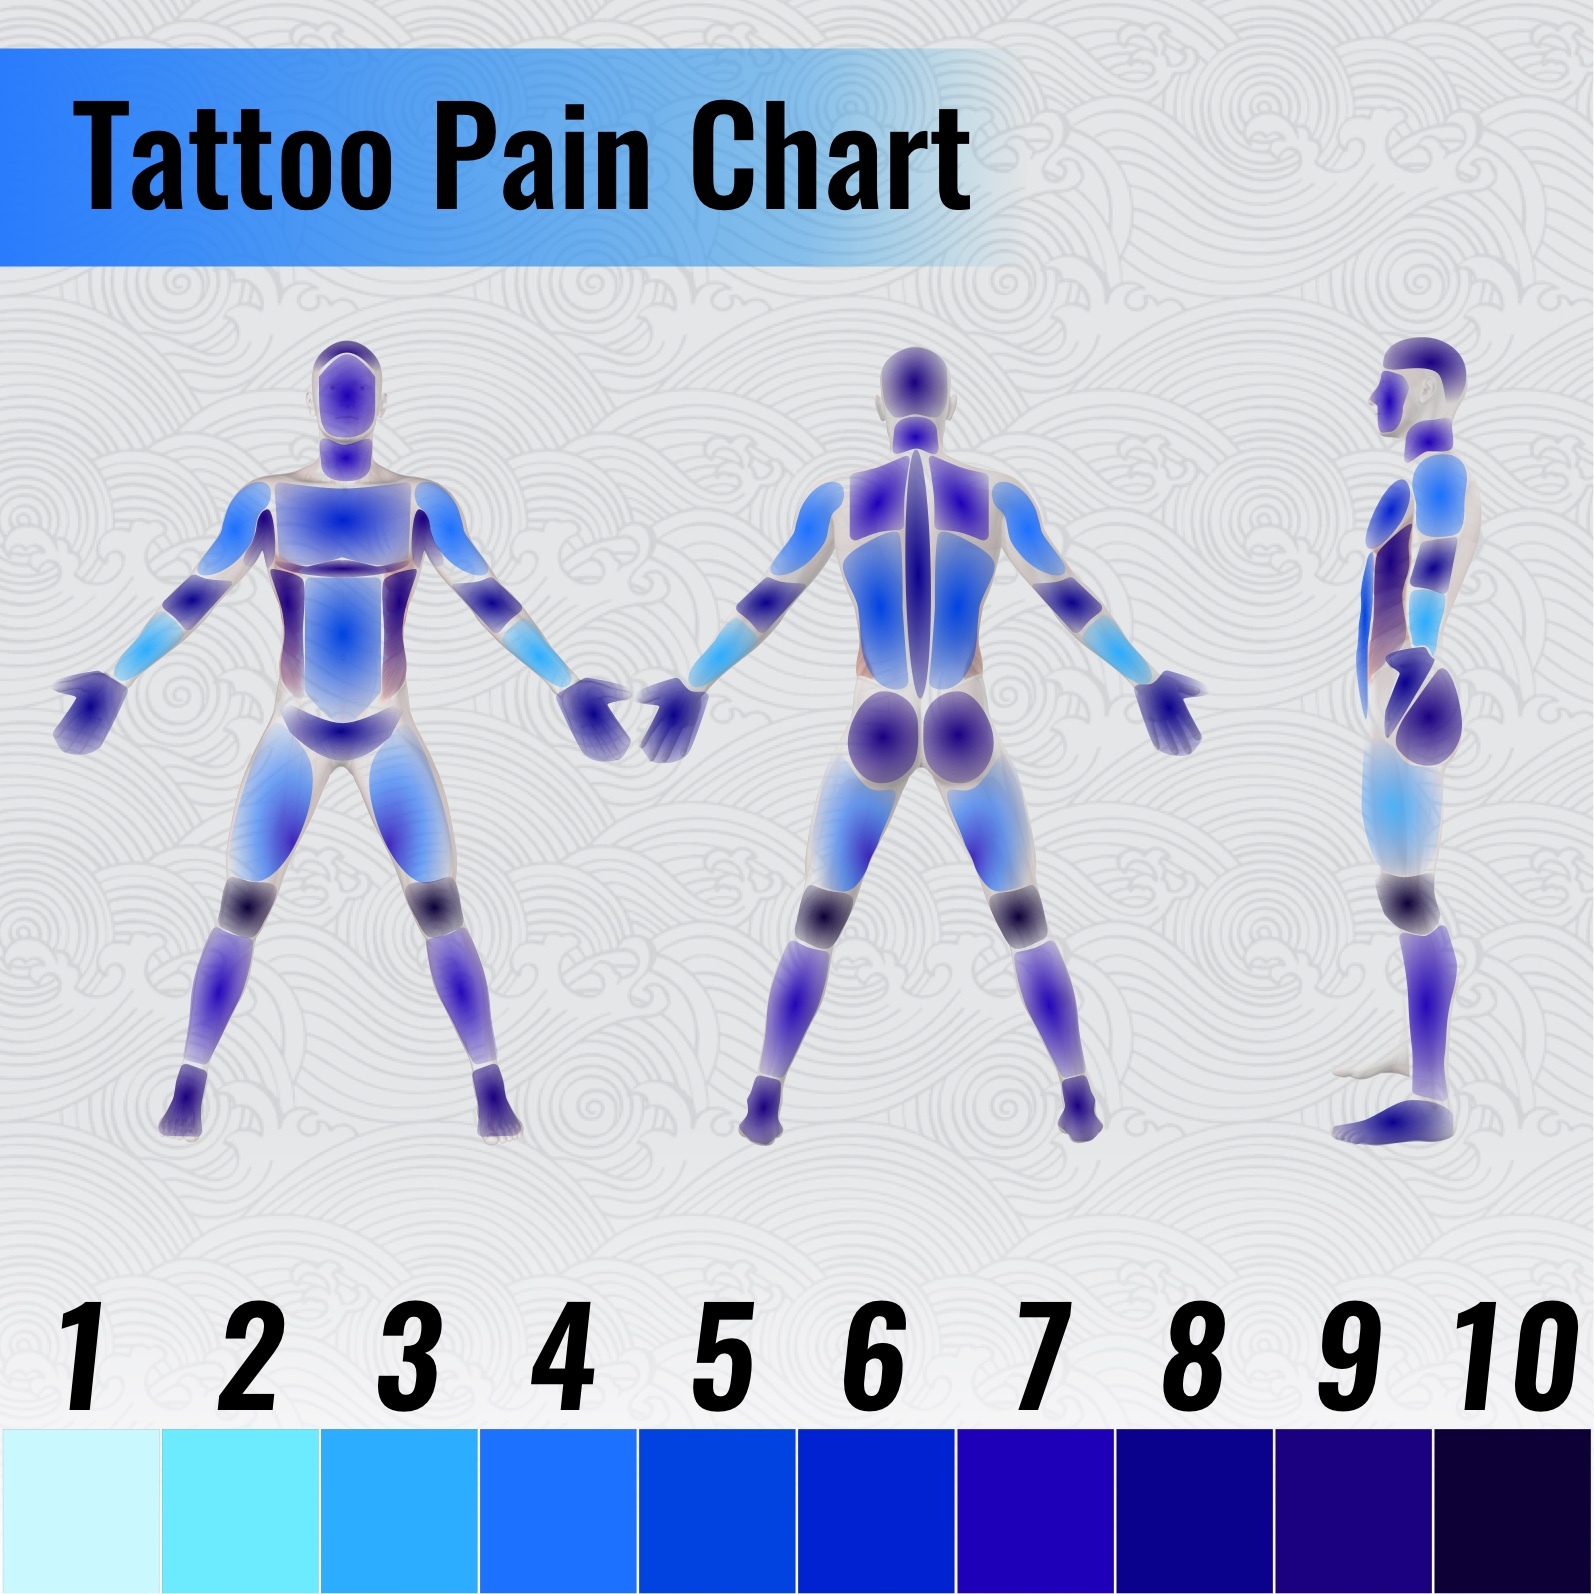 Finger tattoo pain scale 1 10